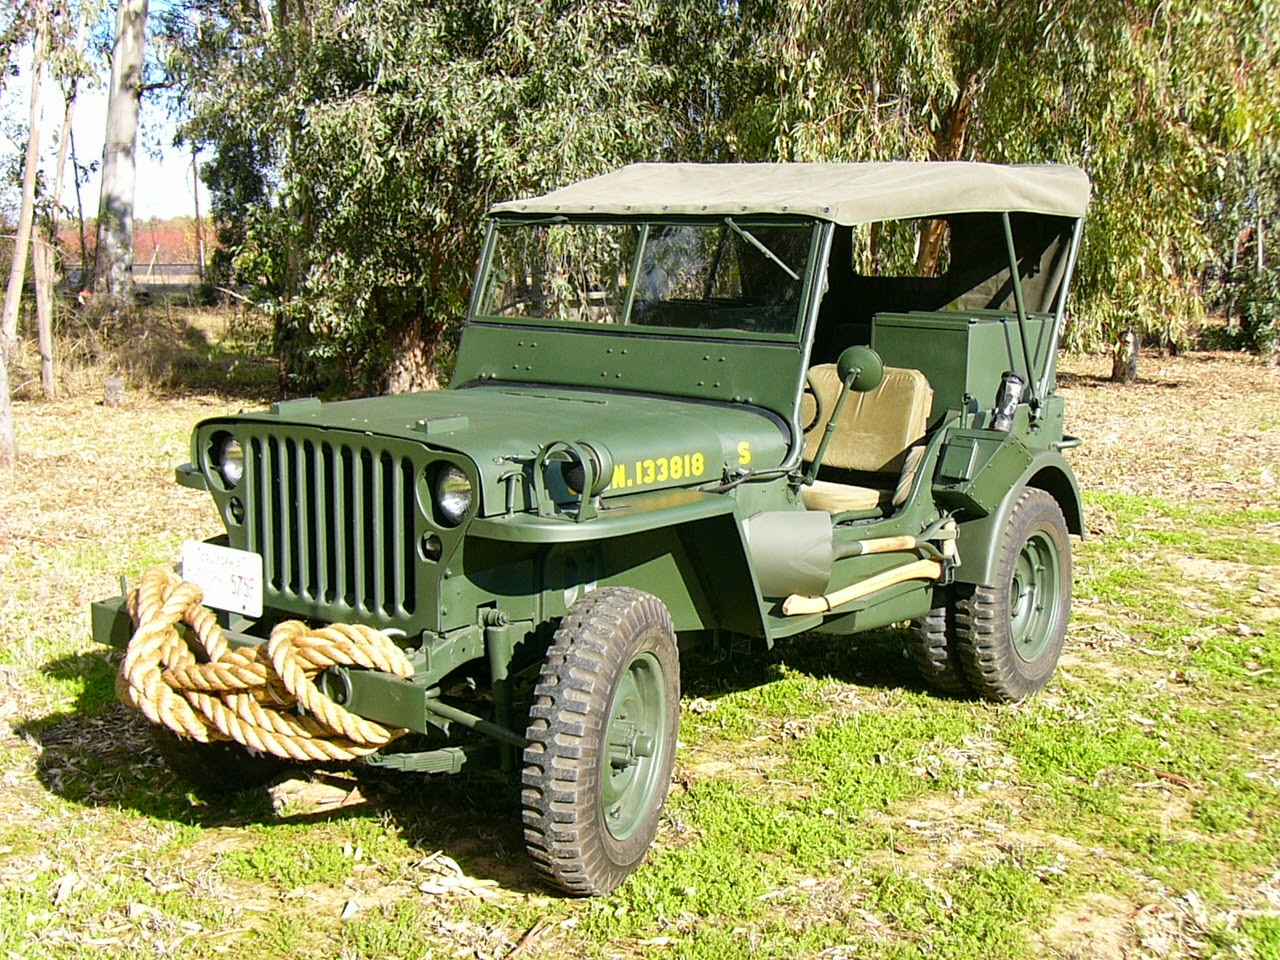 jeepa My dad the u.s. china marine: a jeep is a jeep -or so i thought